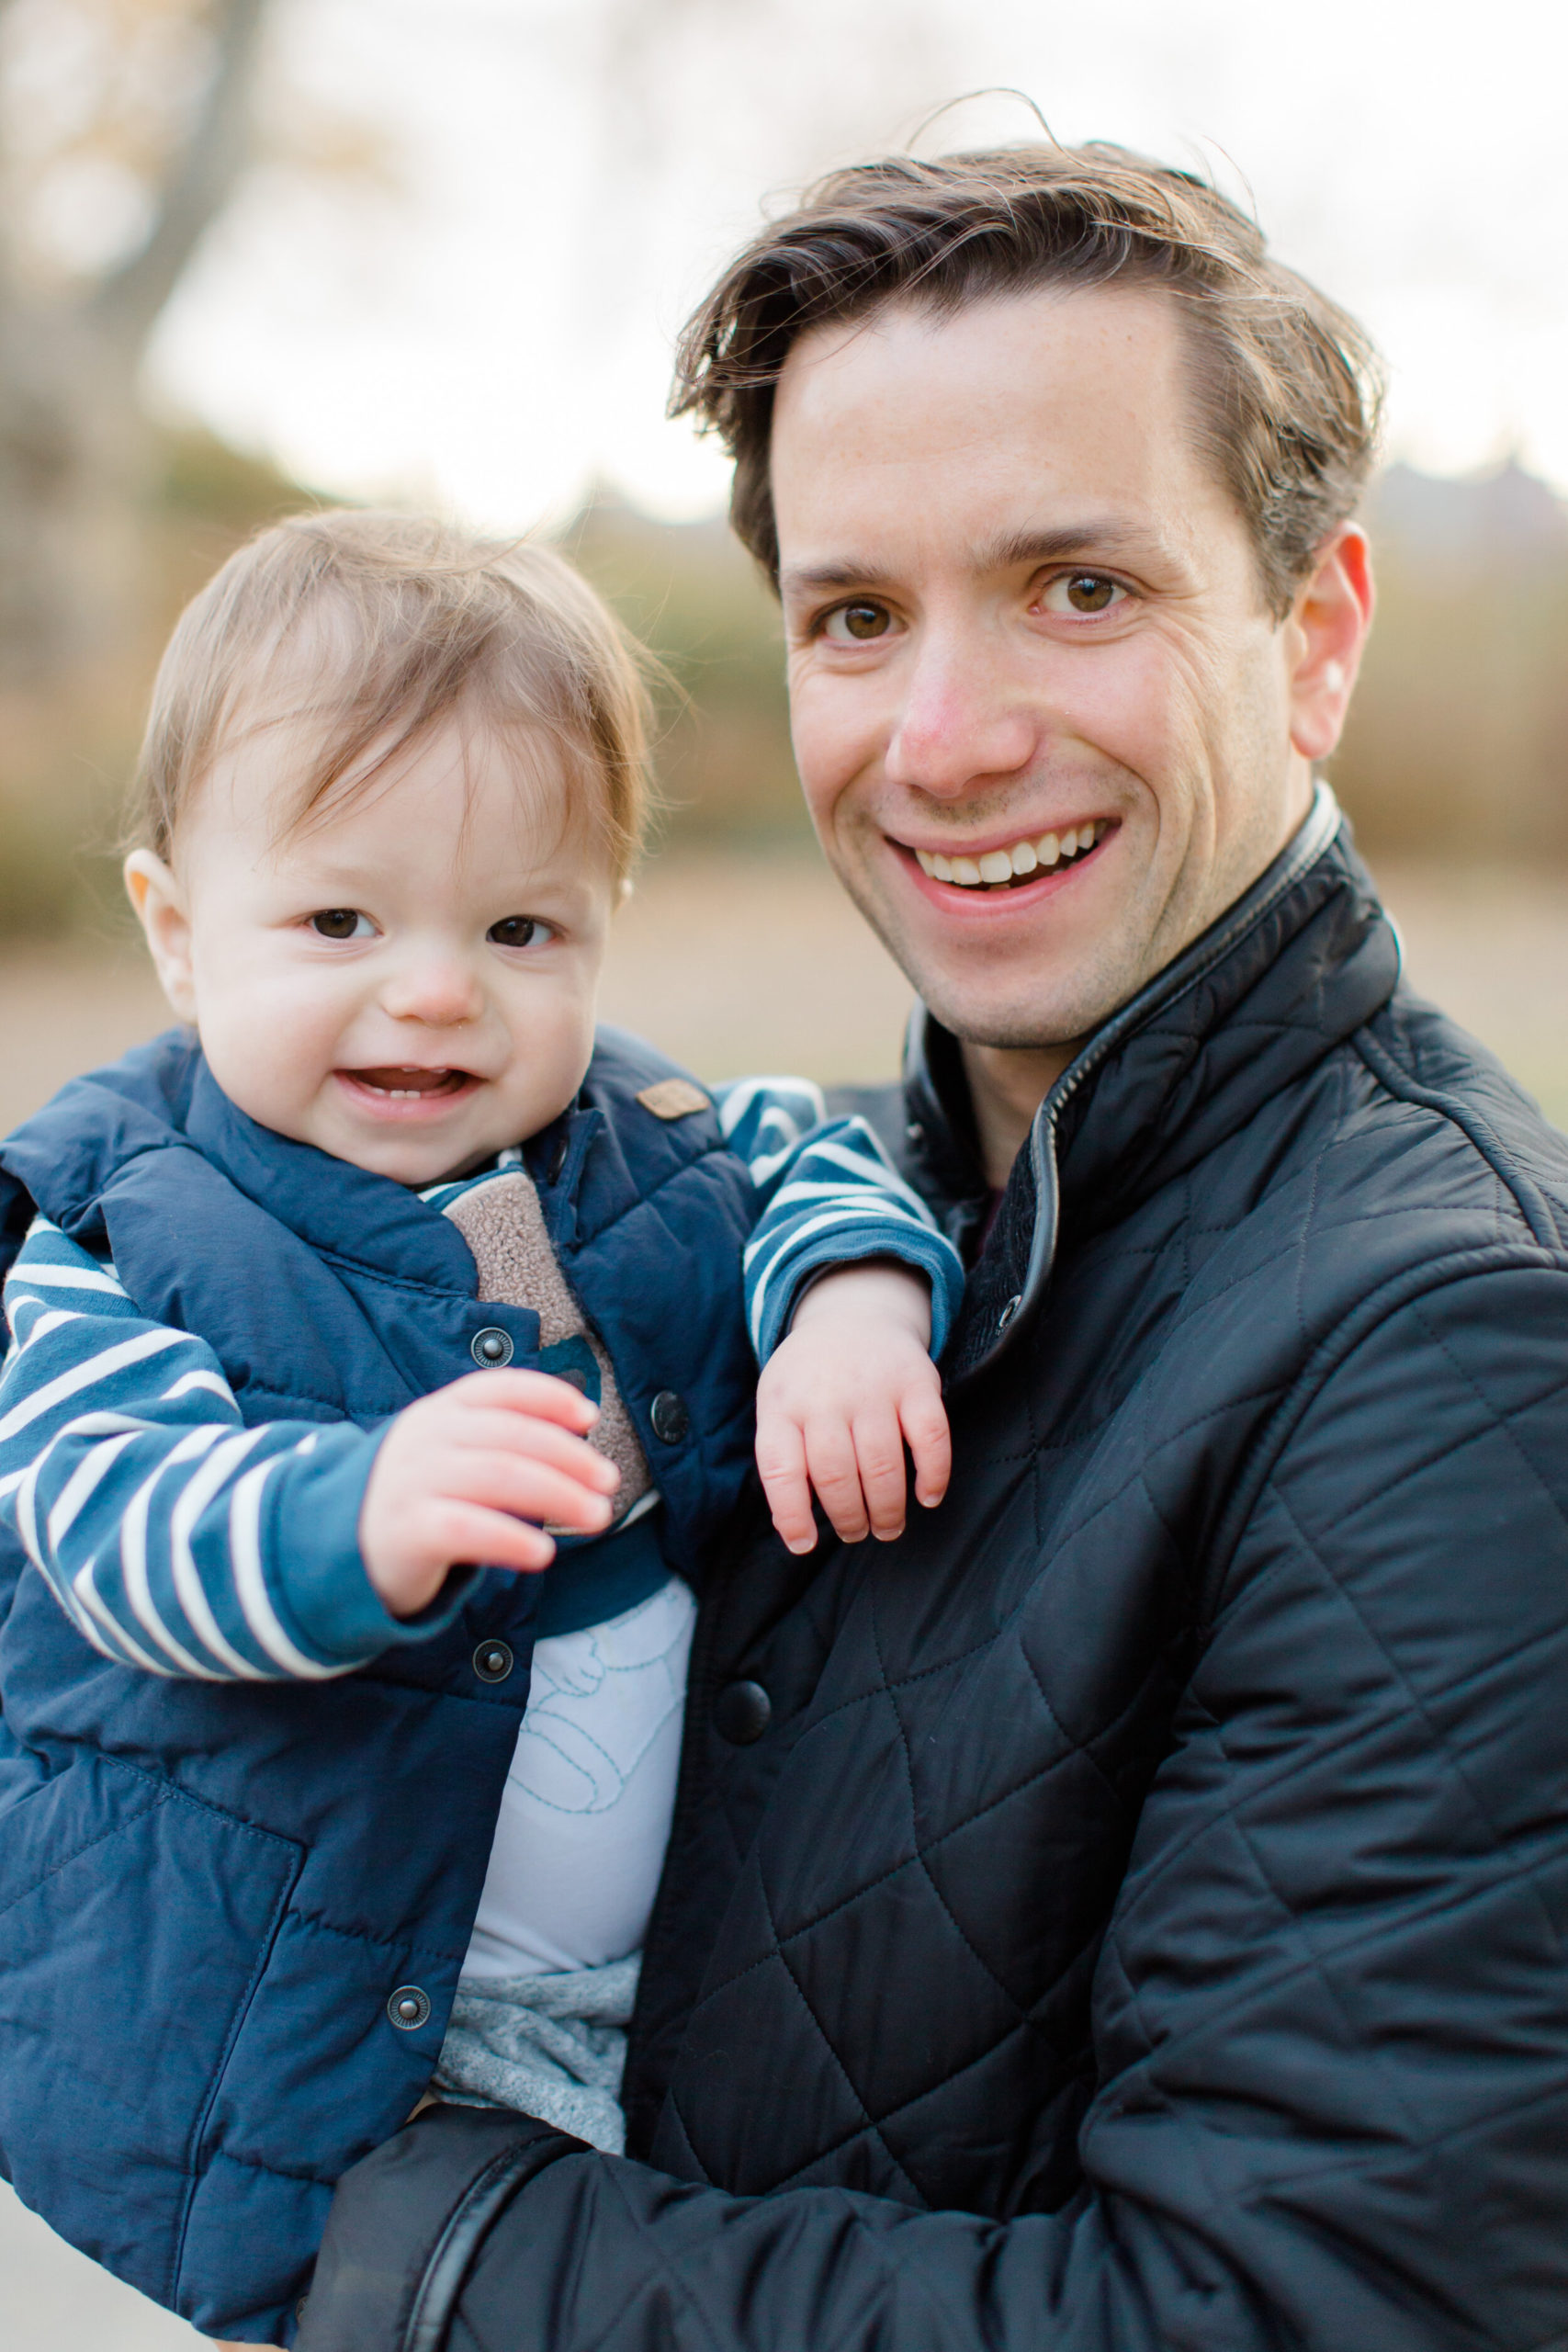 Family photography in Central Park pictured by top NYC family photographer, Jacqueline Clair